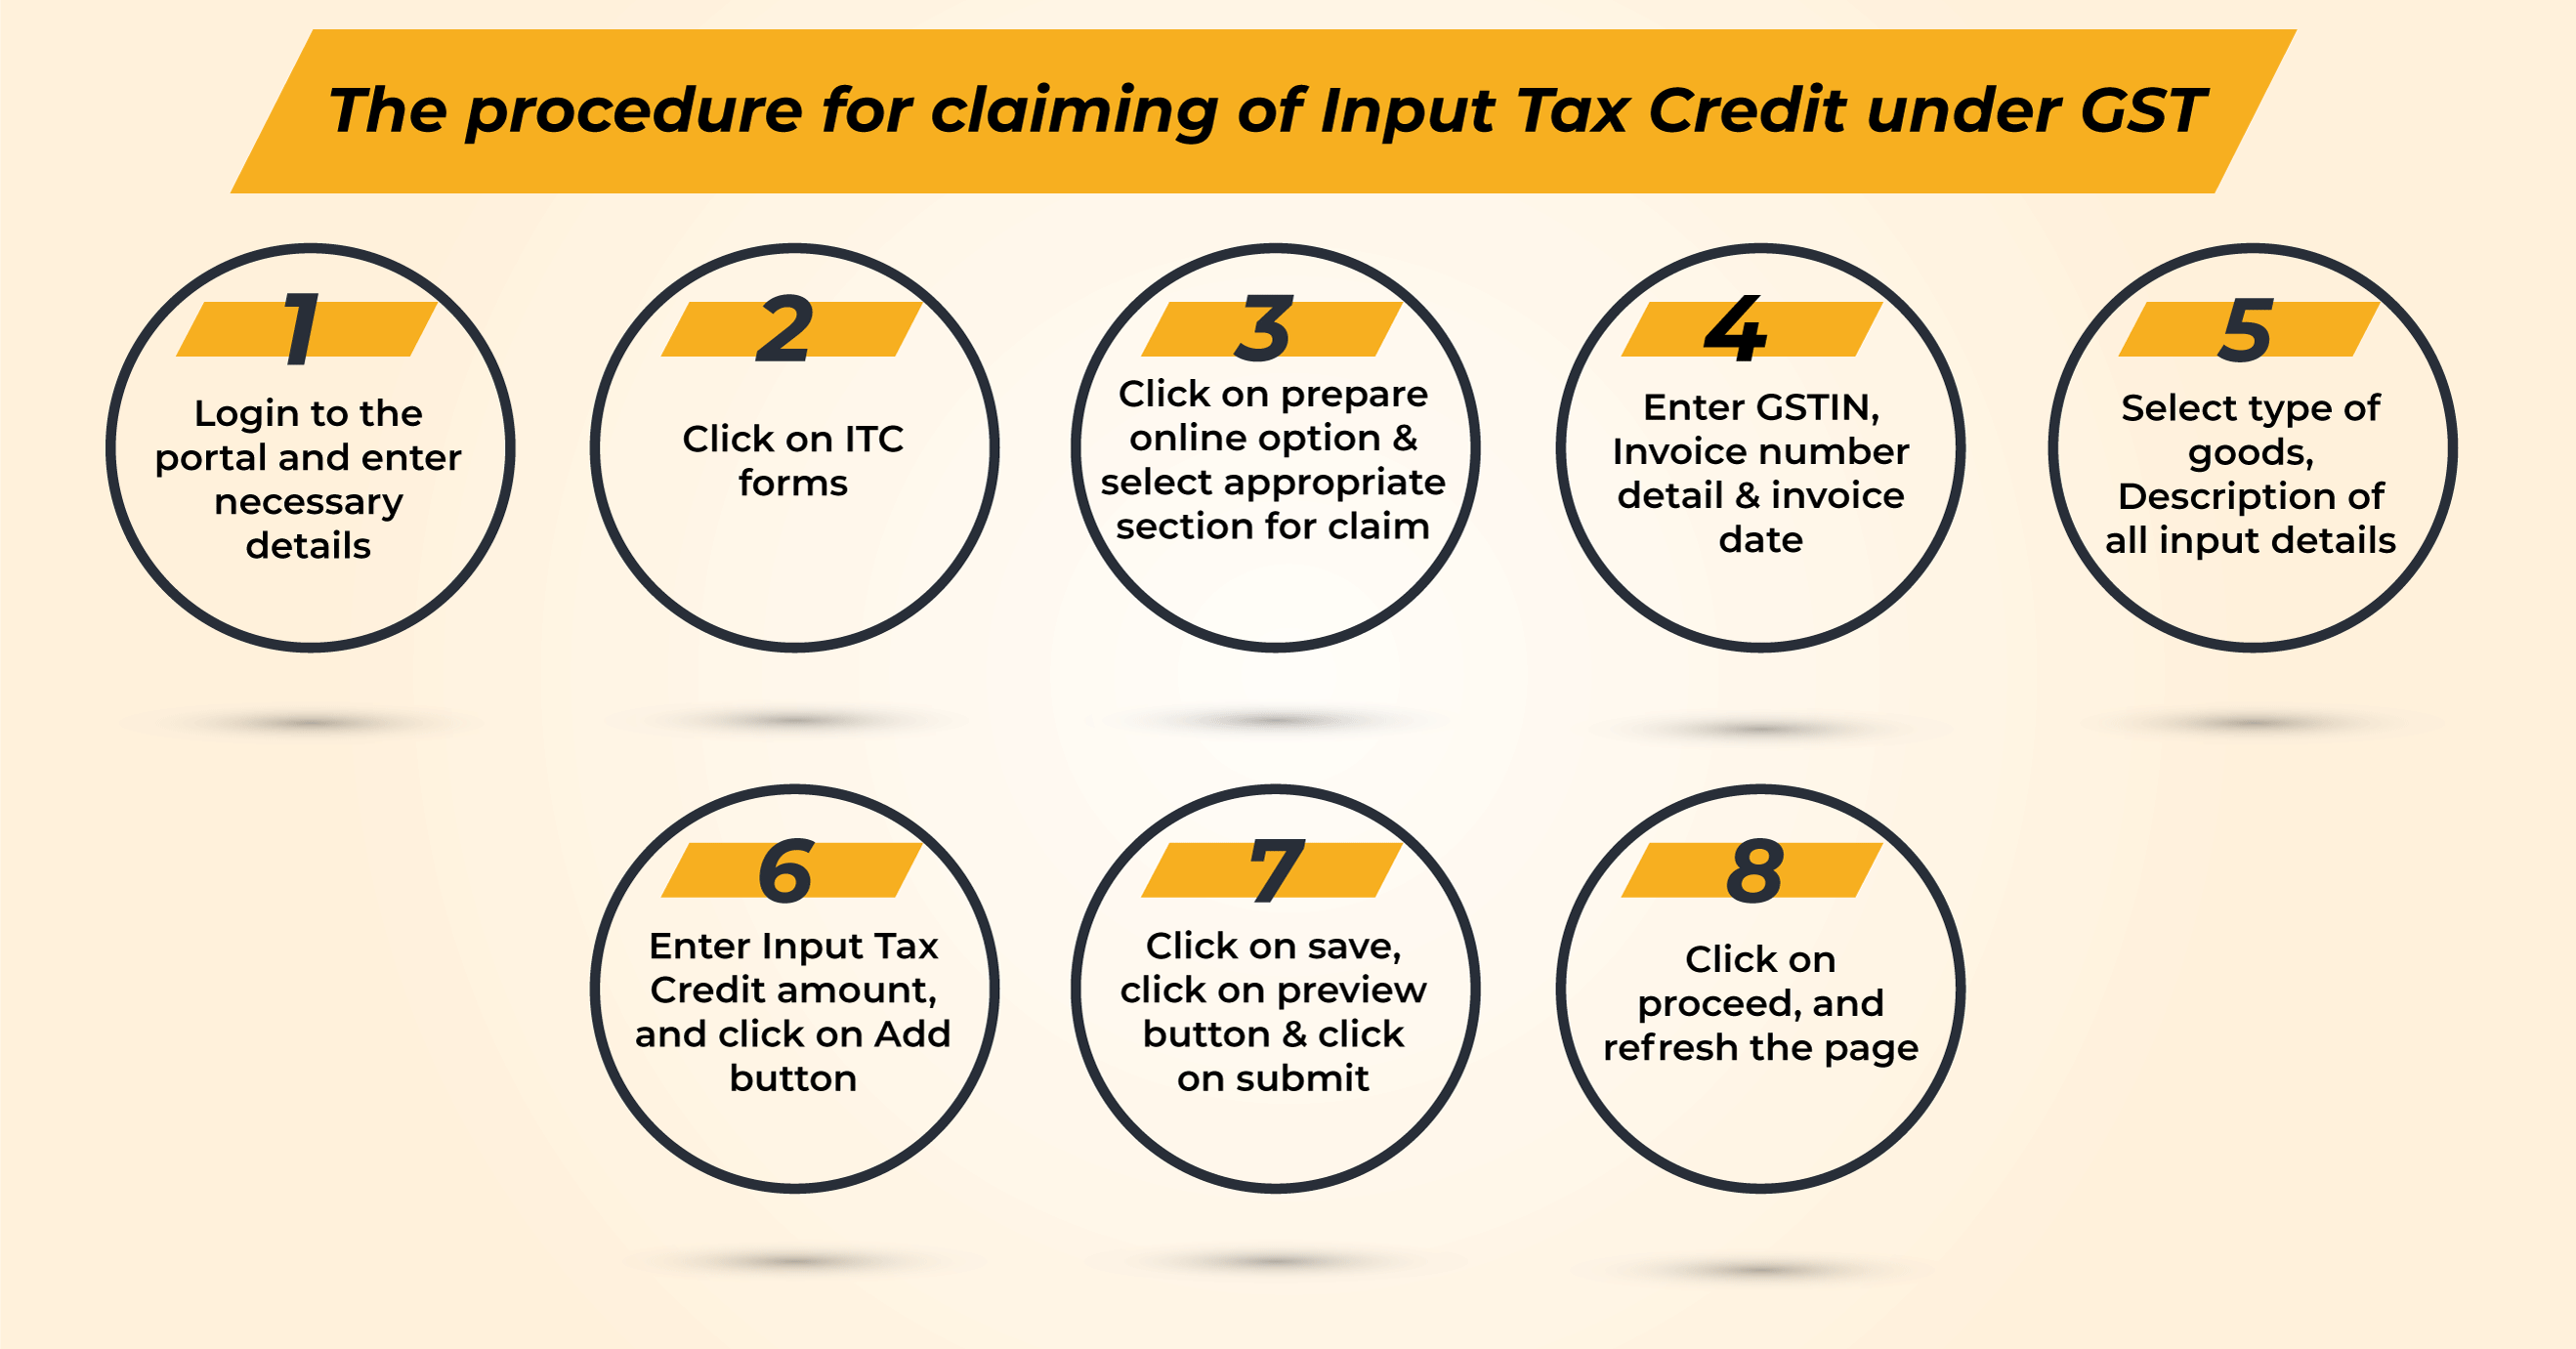 Procedure for claiming Input Tax Credit under GST